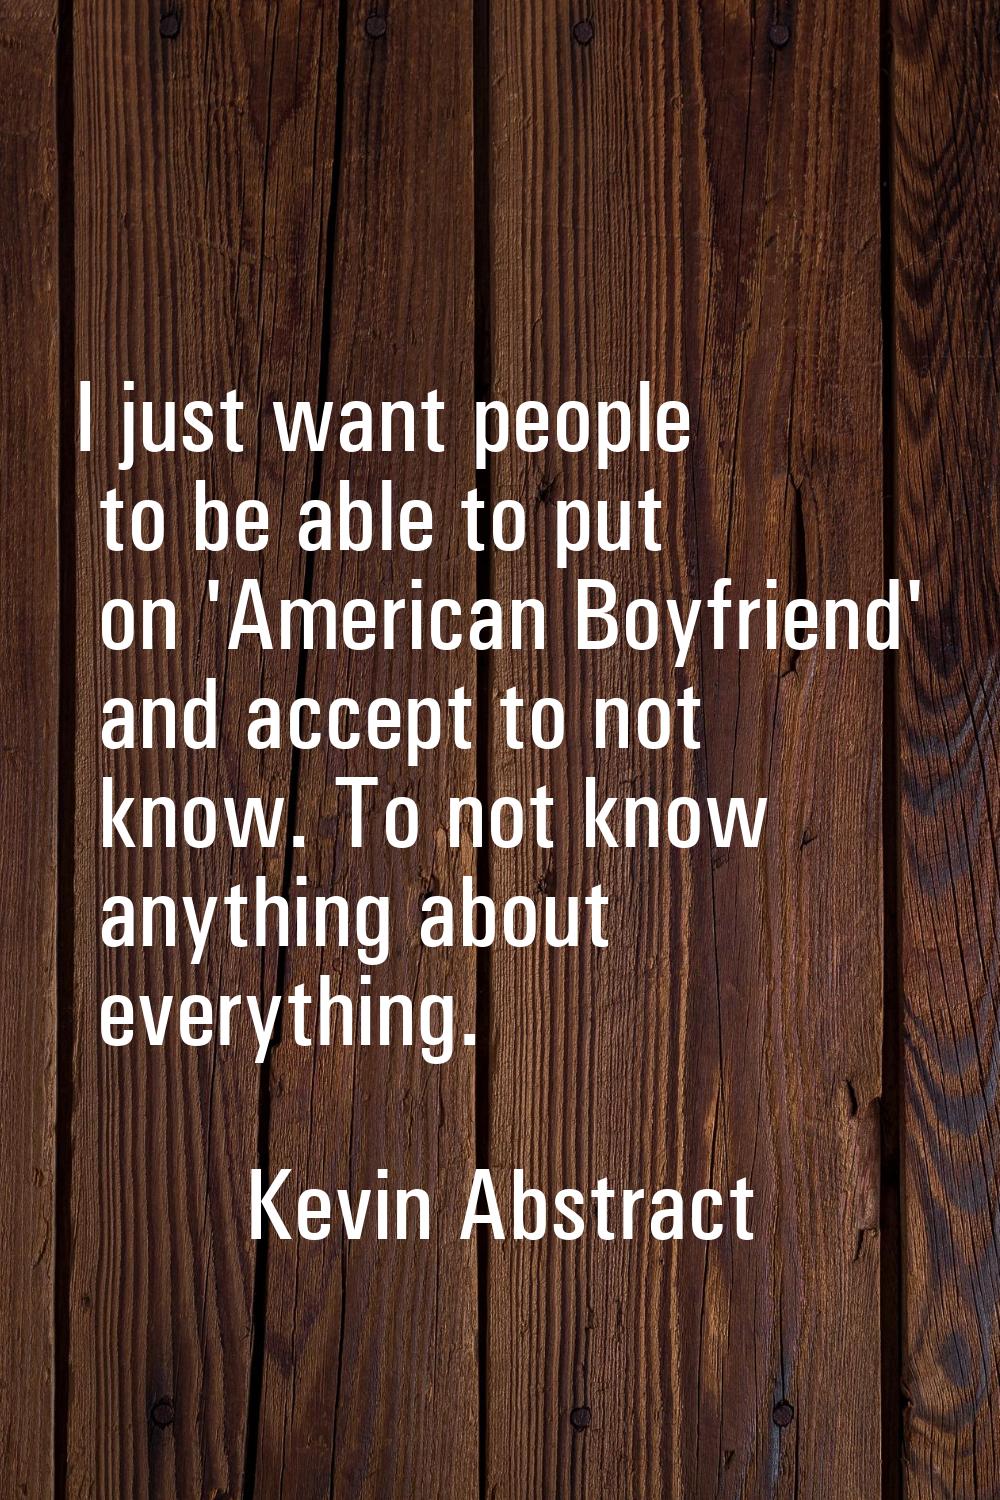 I just want people to be able to put on 'American Boyfriend' and accept to not know. To not know an